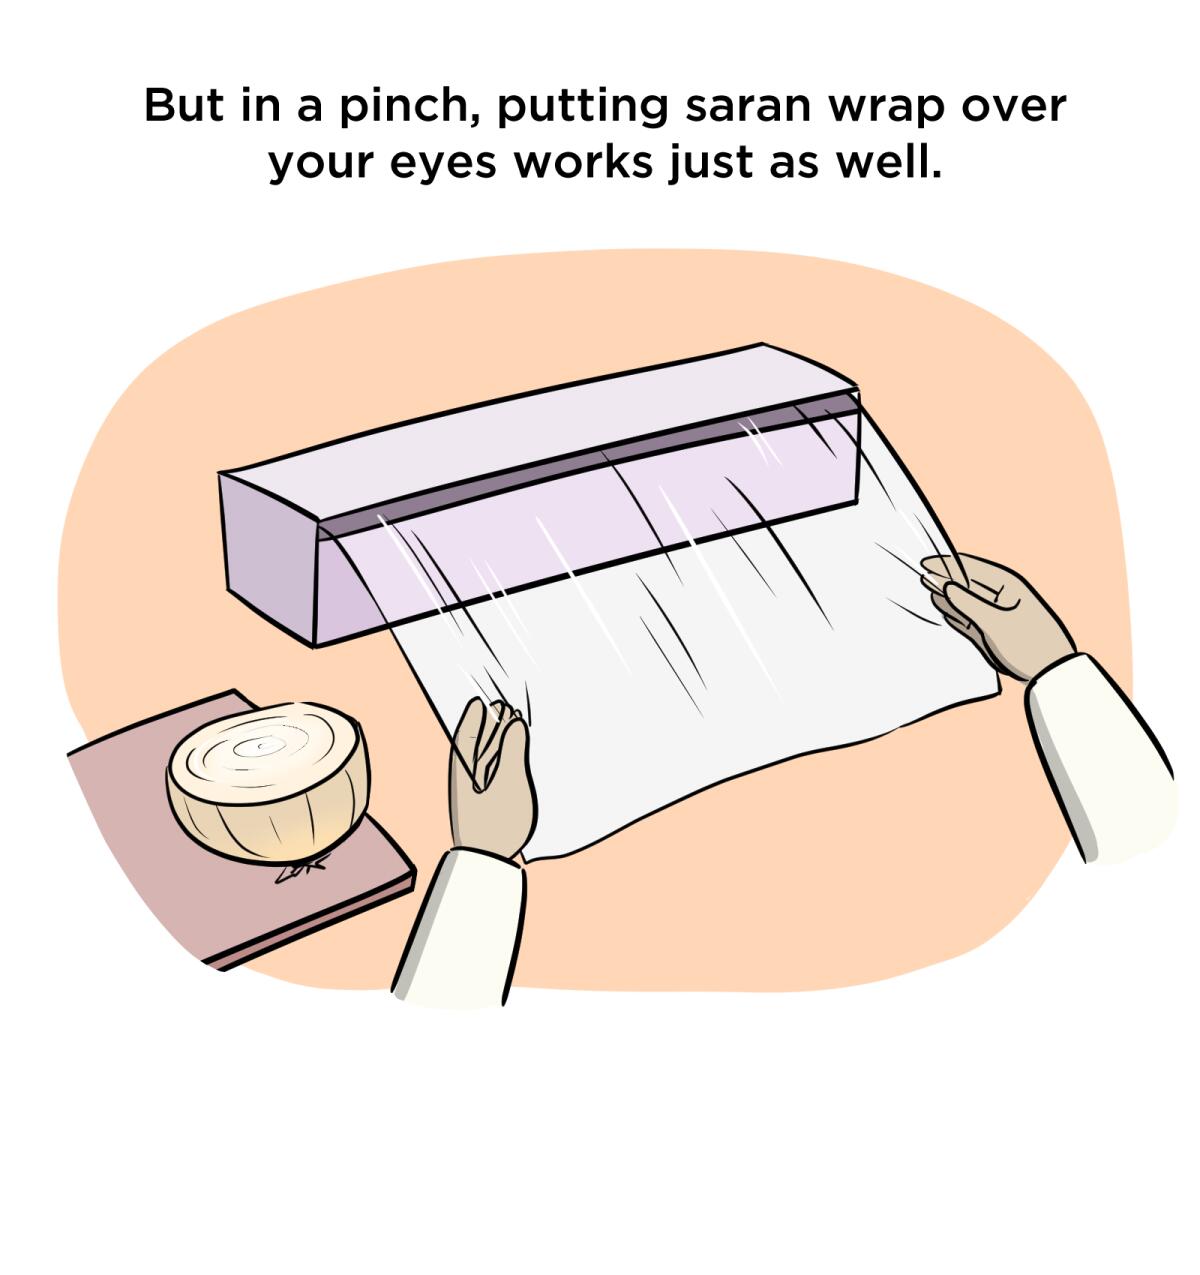 But in a pinch, putting saran wrap over your eyes works just as well.